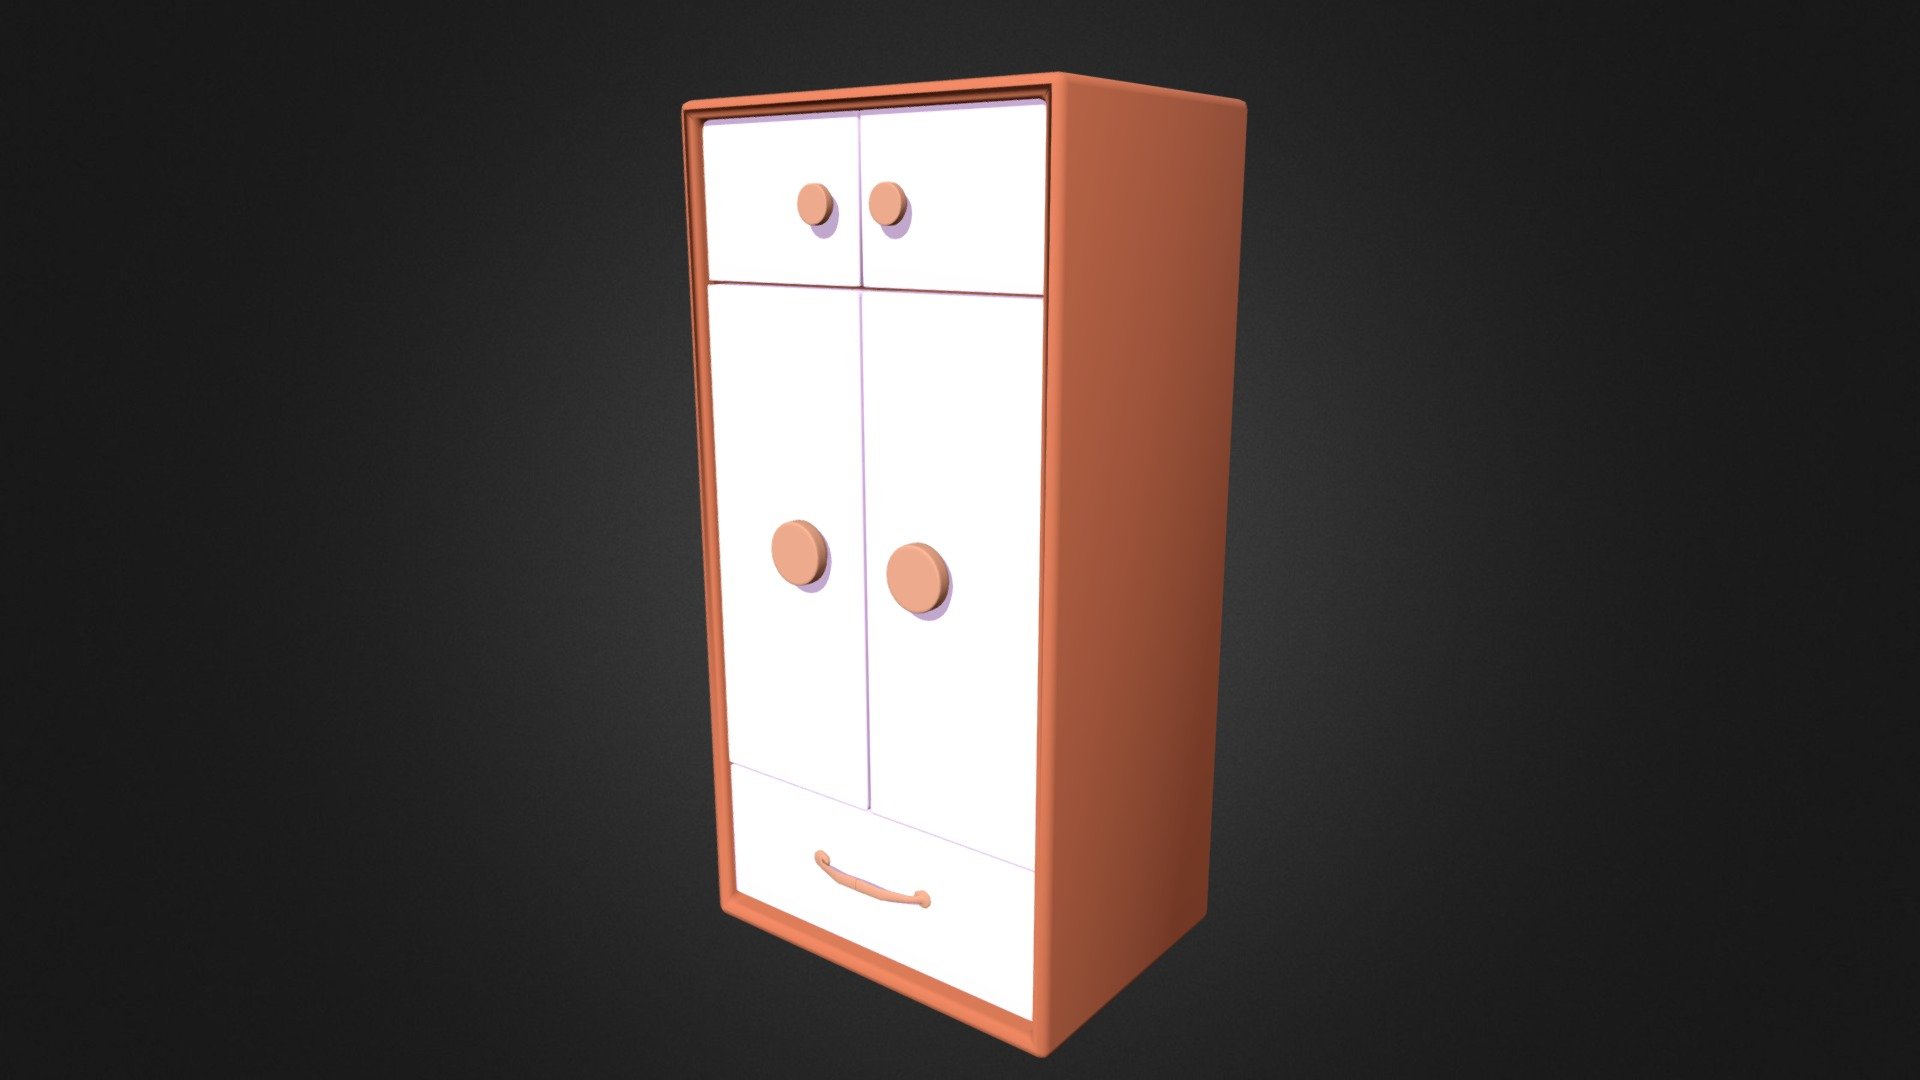 Lowpoly wardrobe made in blender. It was used for an animation 3d model